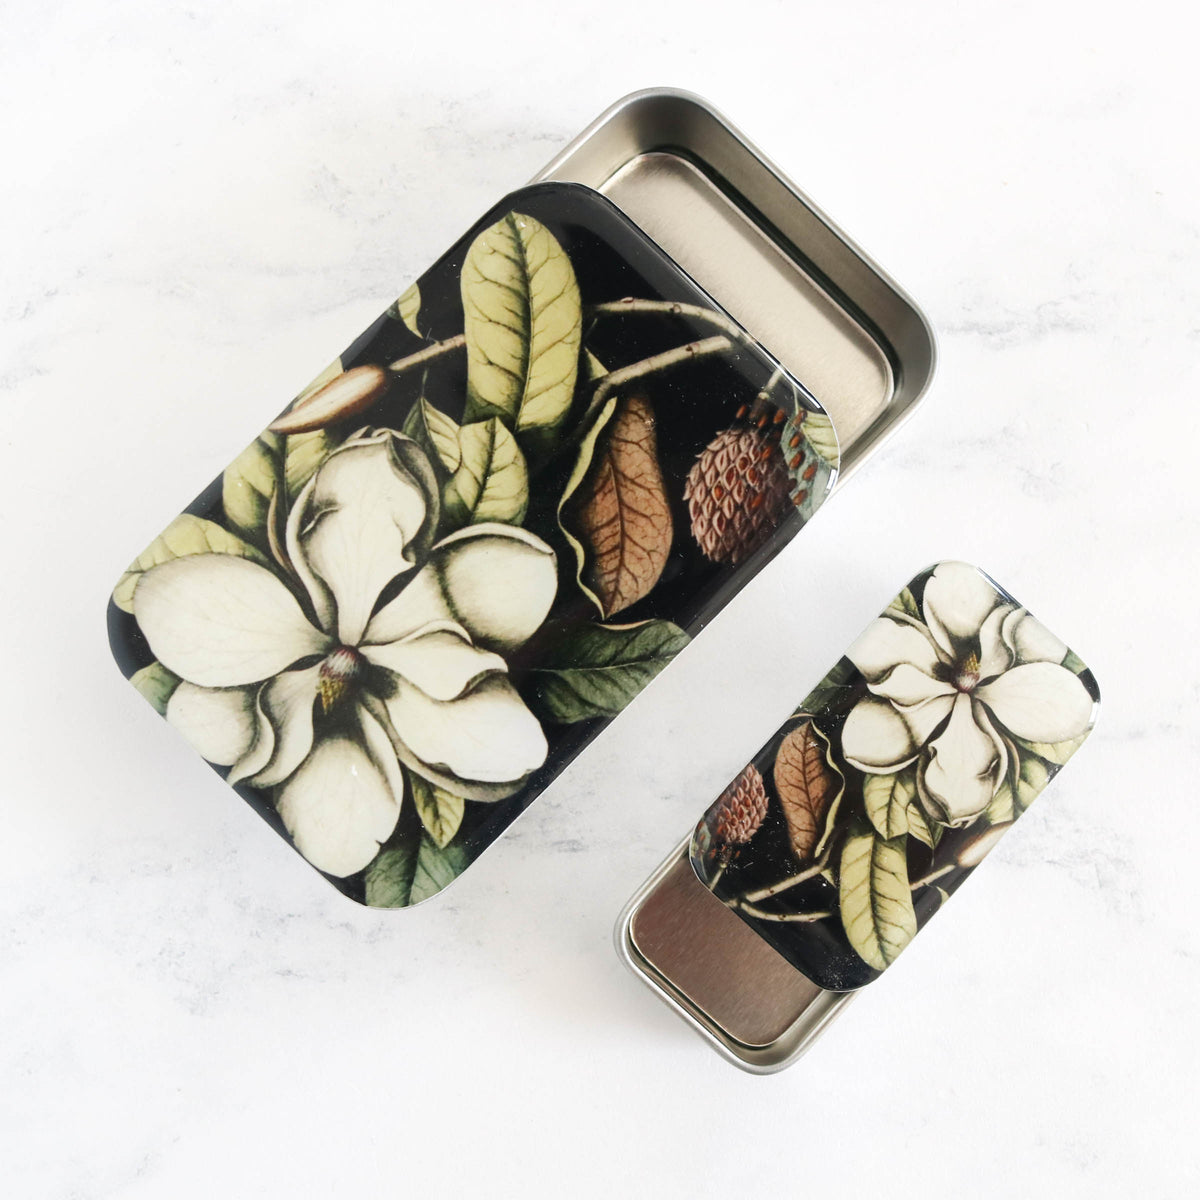 Vintage-Inspired Storage and Notions Tins - Magnolia